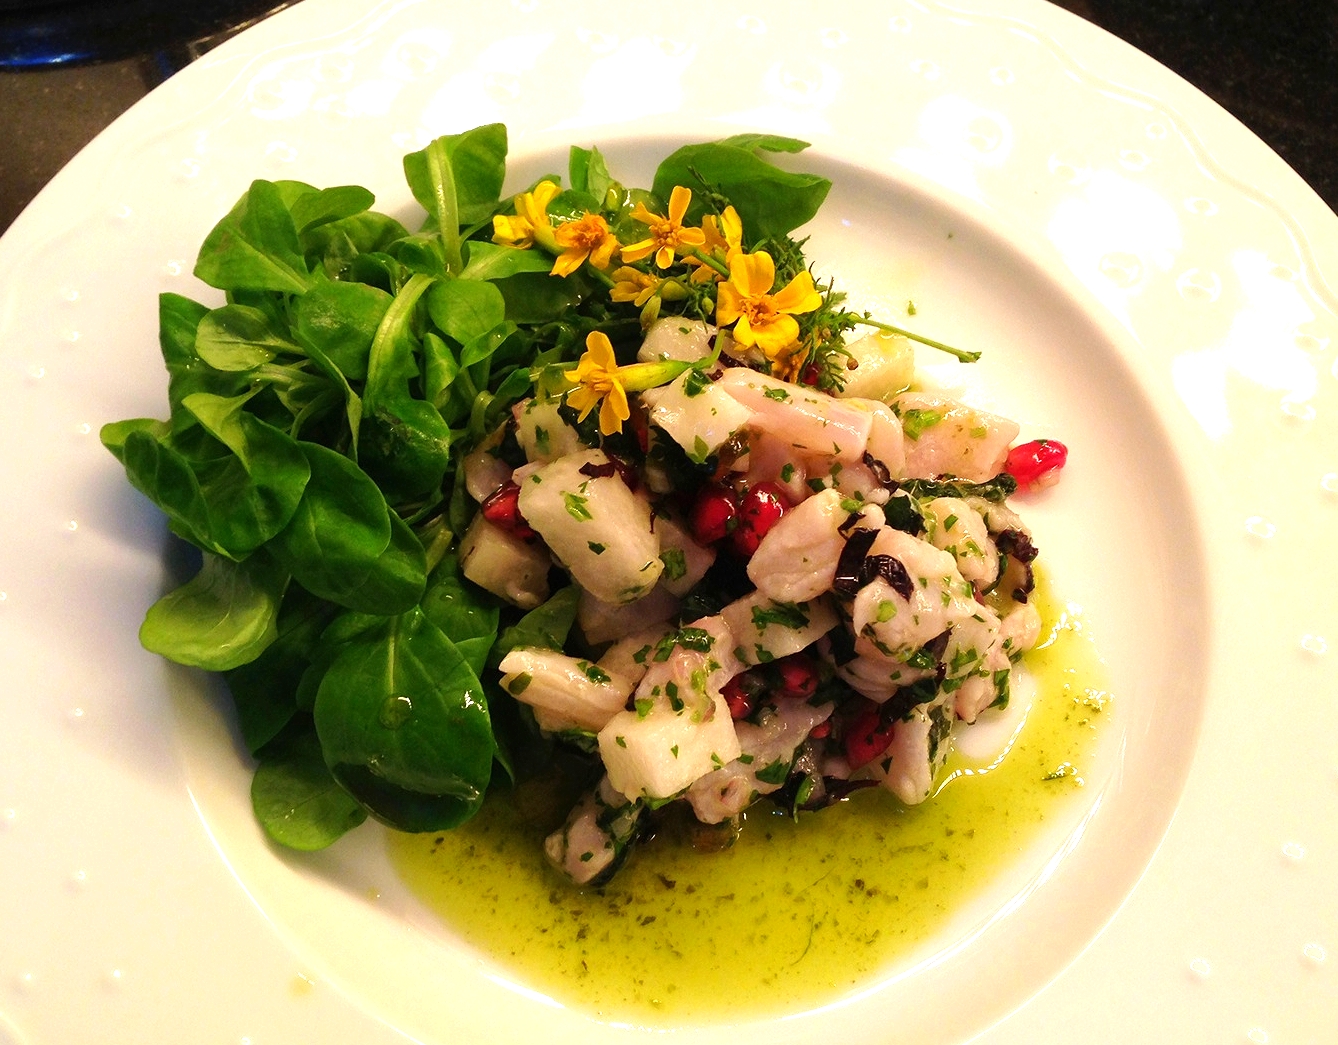 Sea bass ceviche with herb oil, pomegranate, opal basil, and edible flowers